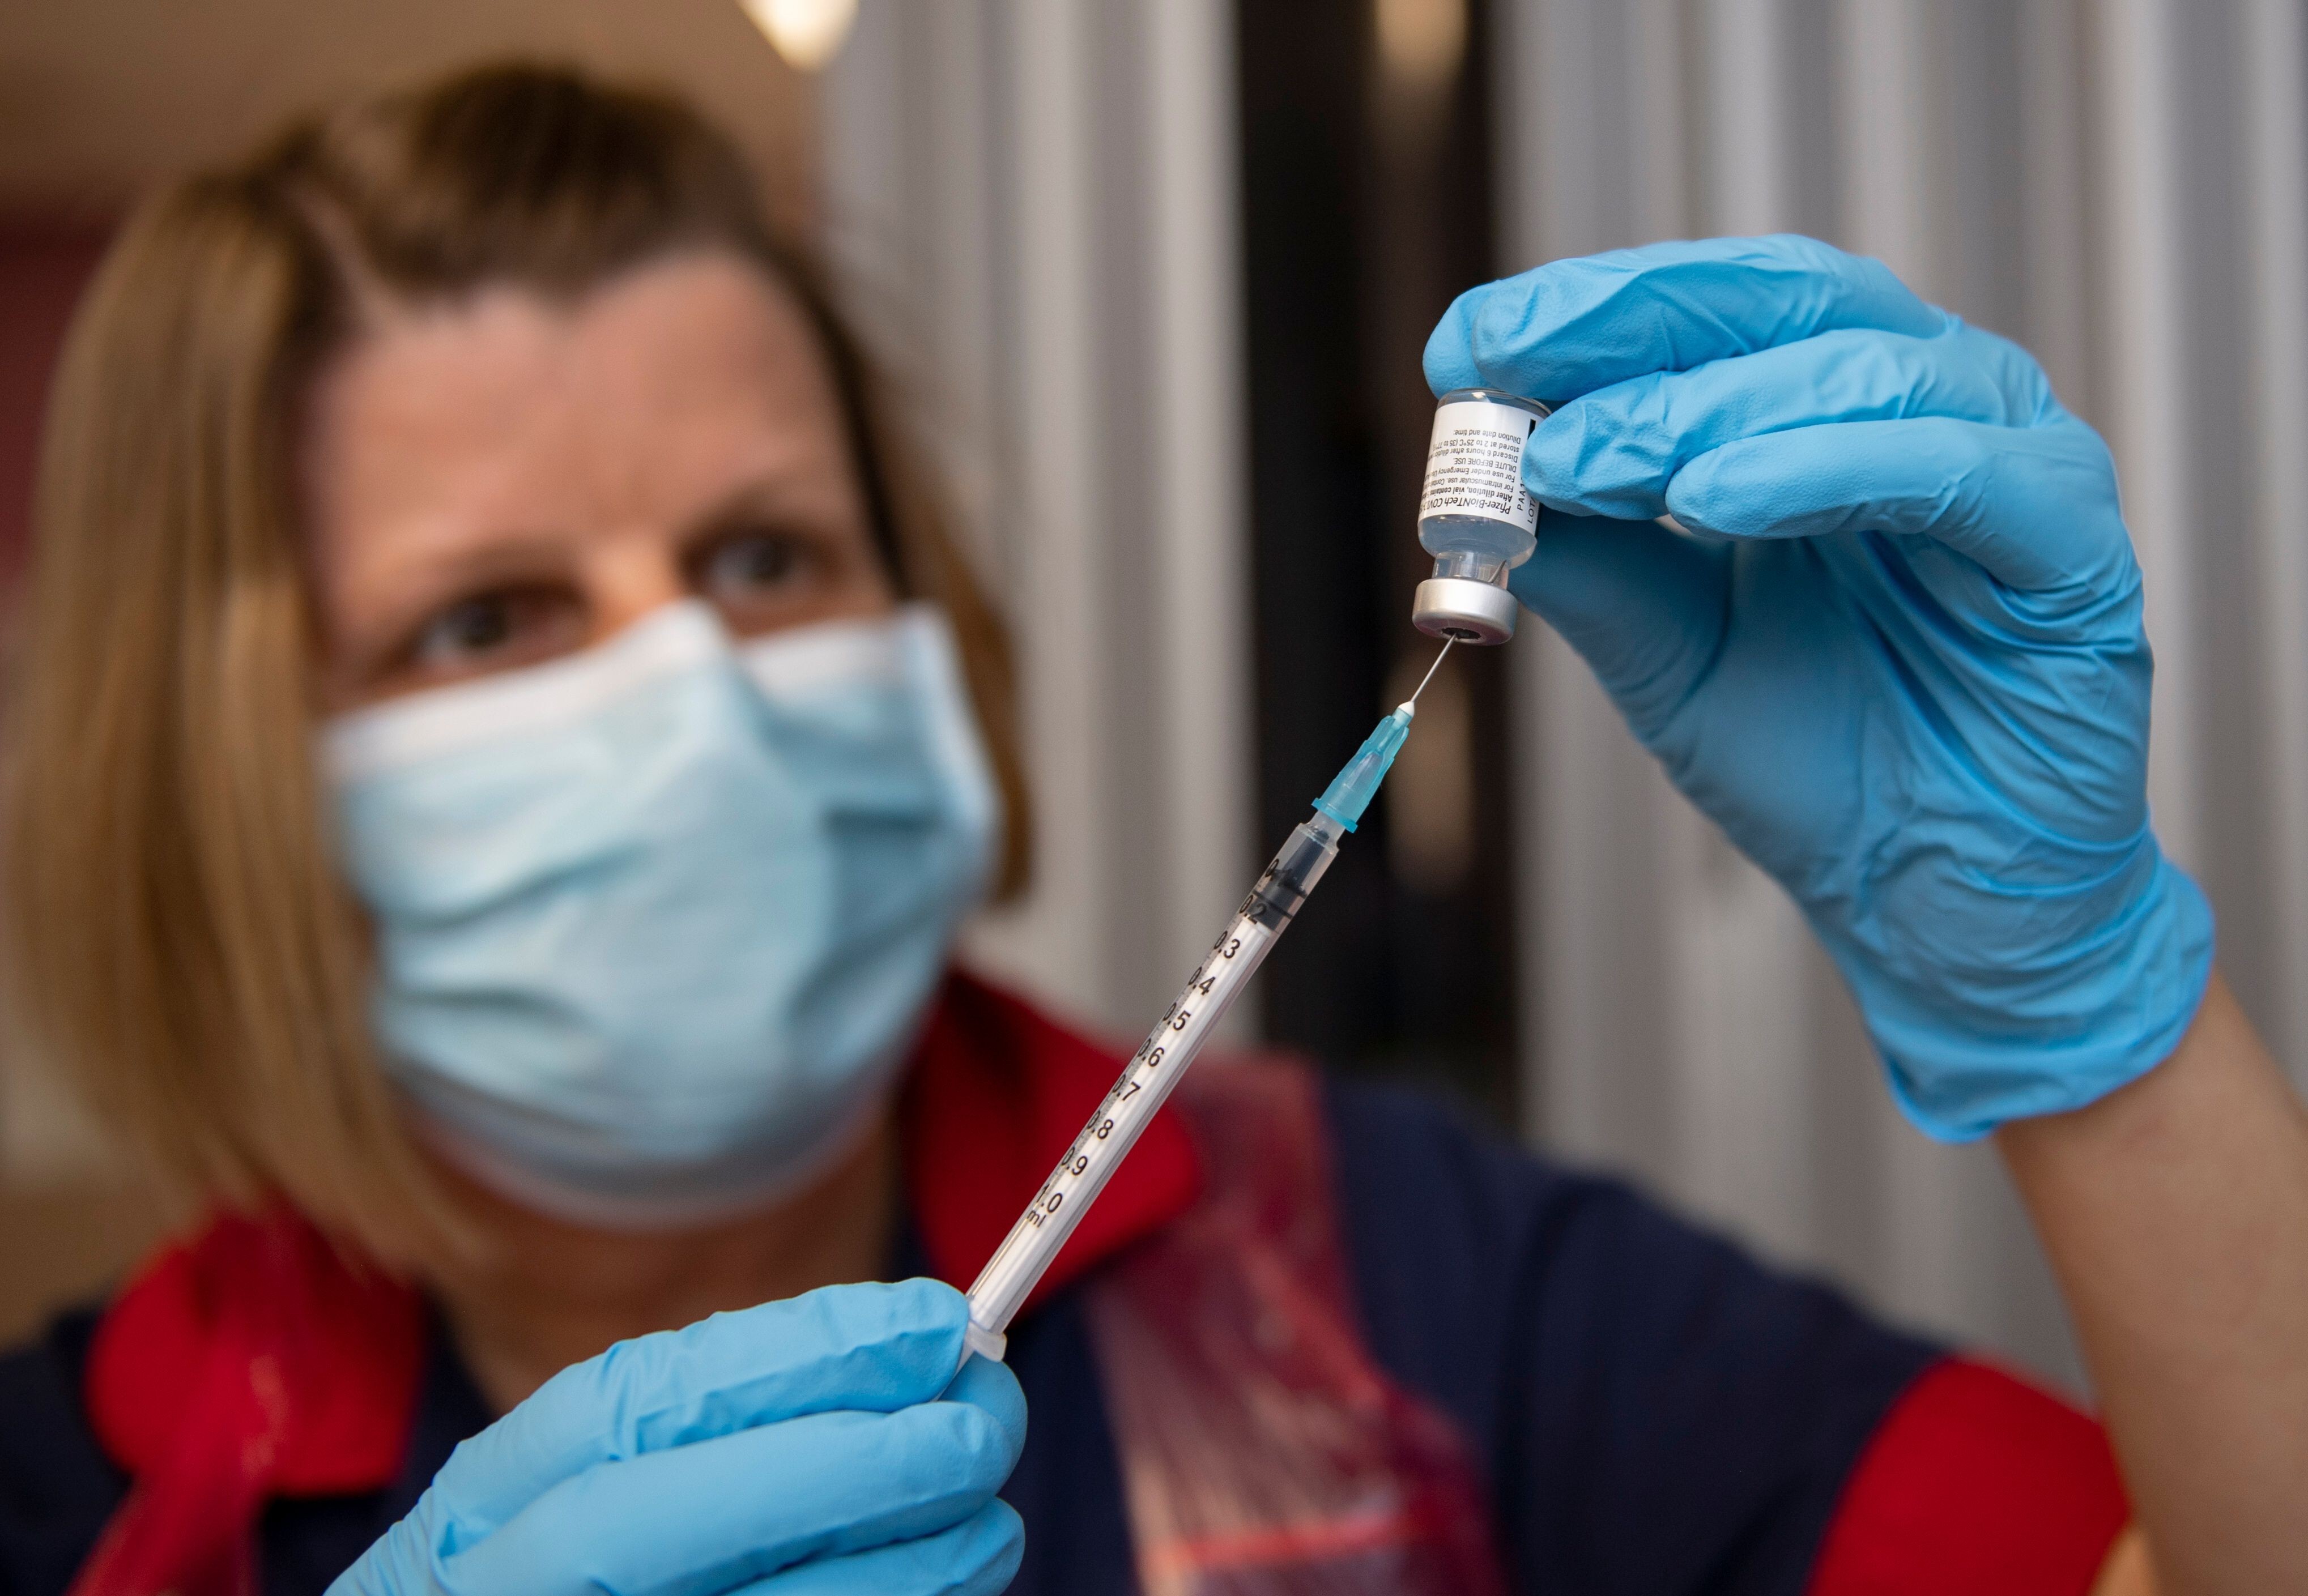 A nurse prepares a dose of the Pfizer-BioNTech Covid-19 vaccine at the Northern General Hospital in Sheffield, UK, on December 8. Photo: AFP